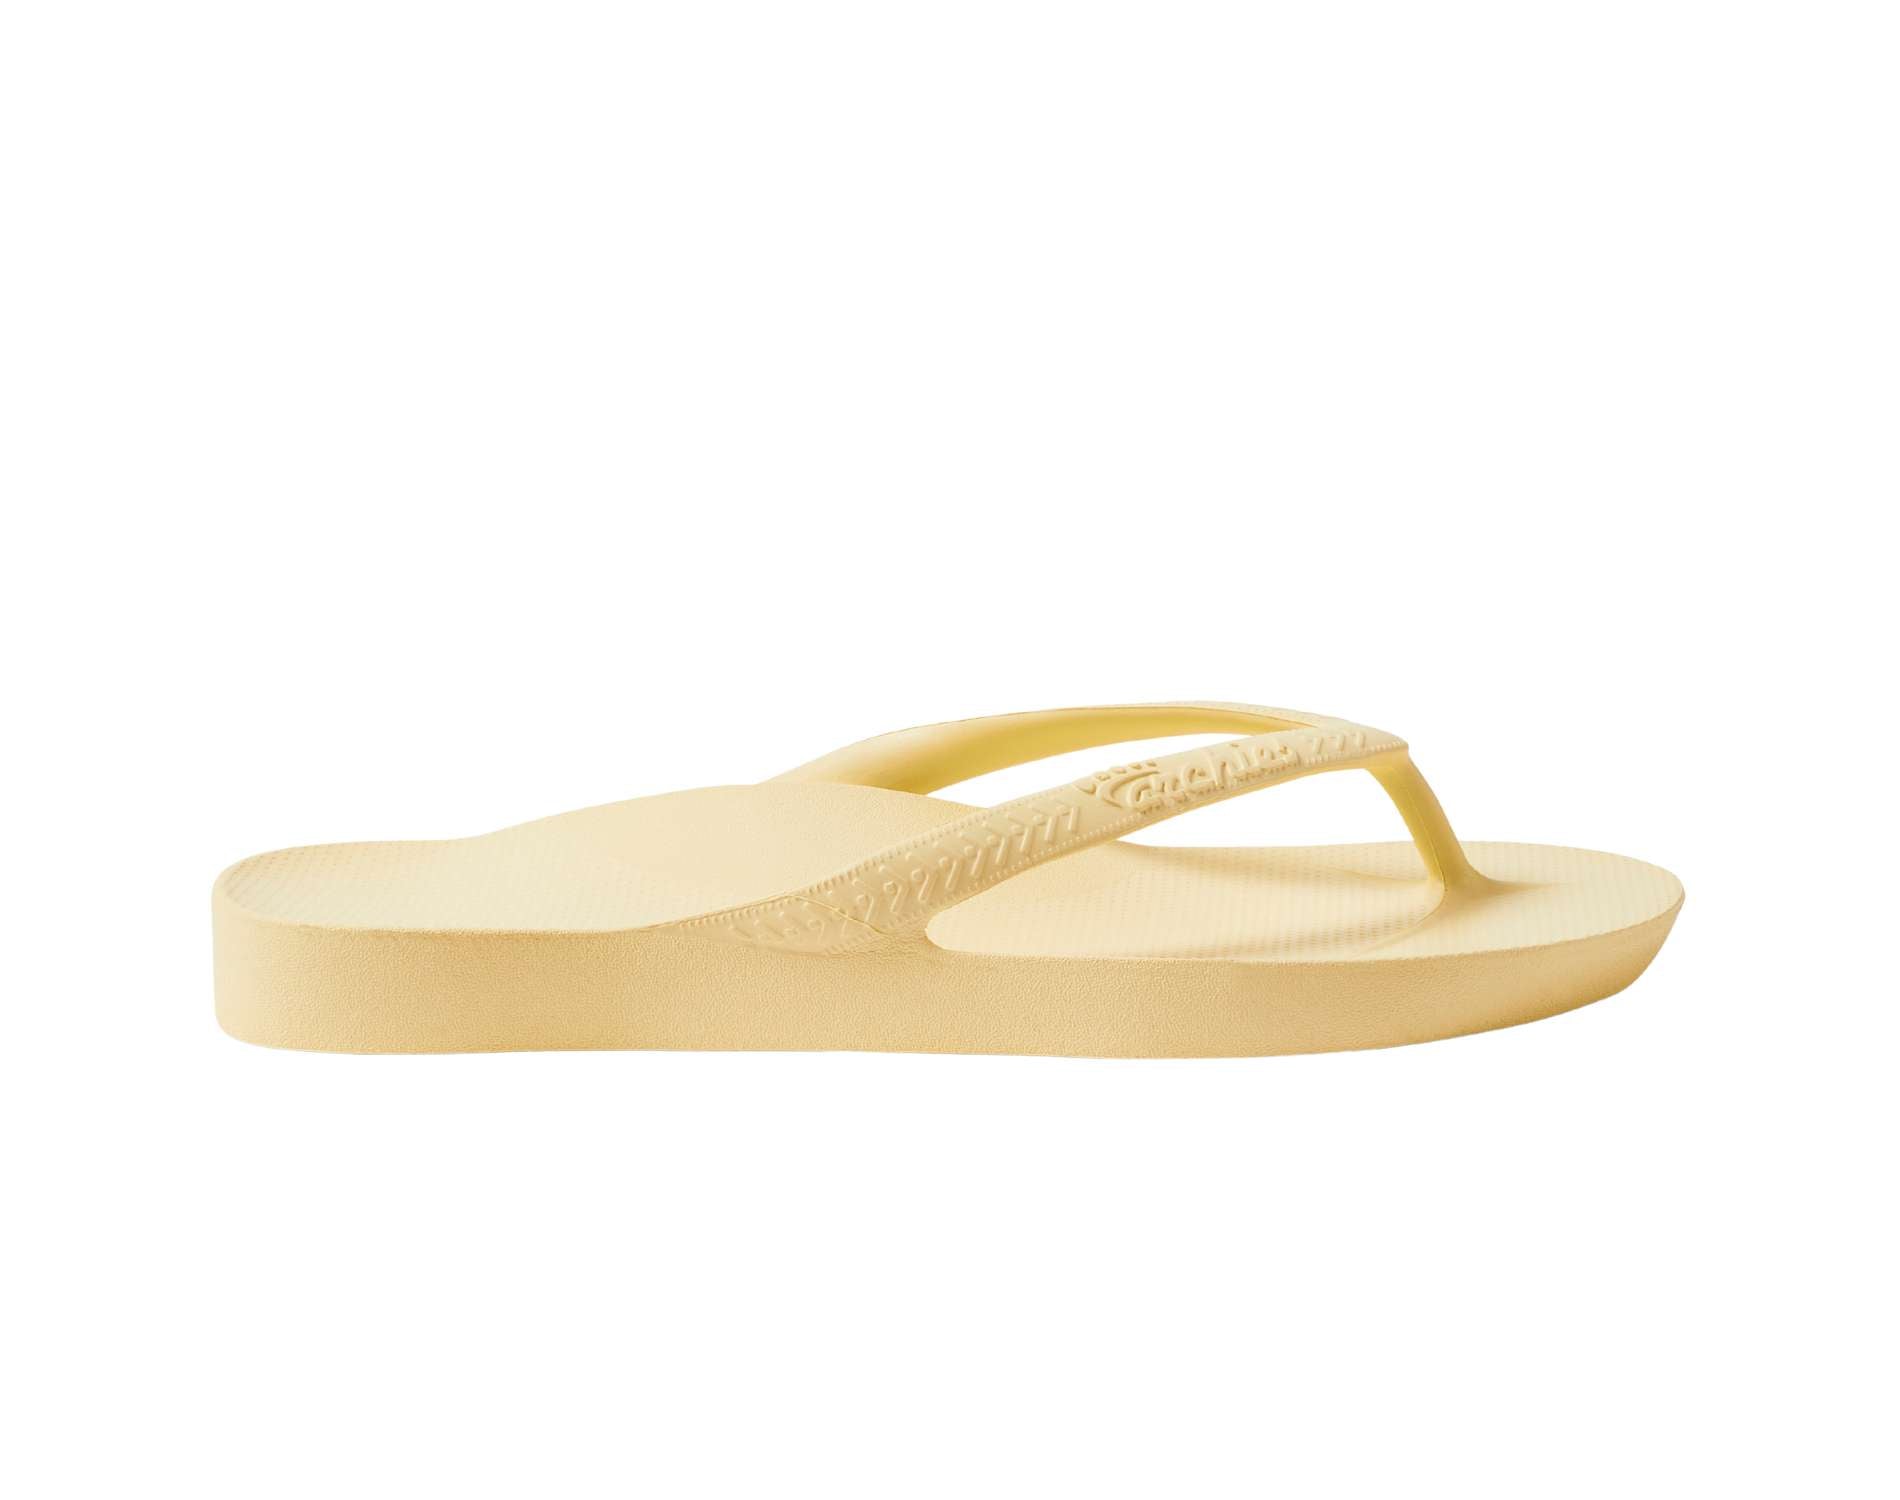 ARCHIES ARCH SUPPORT THONGS / WHITE